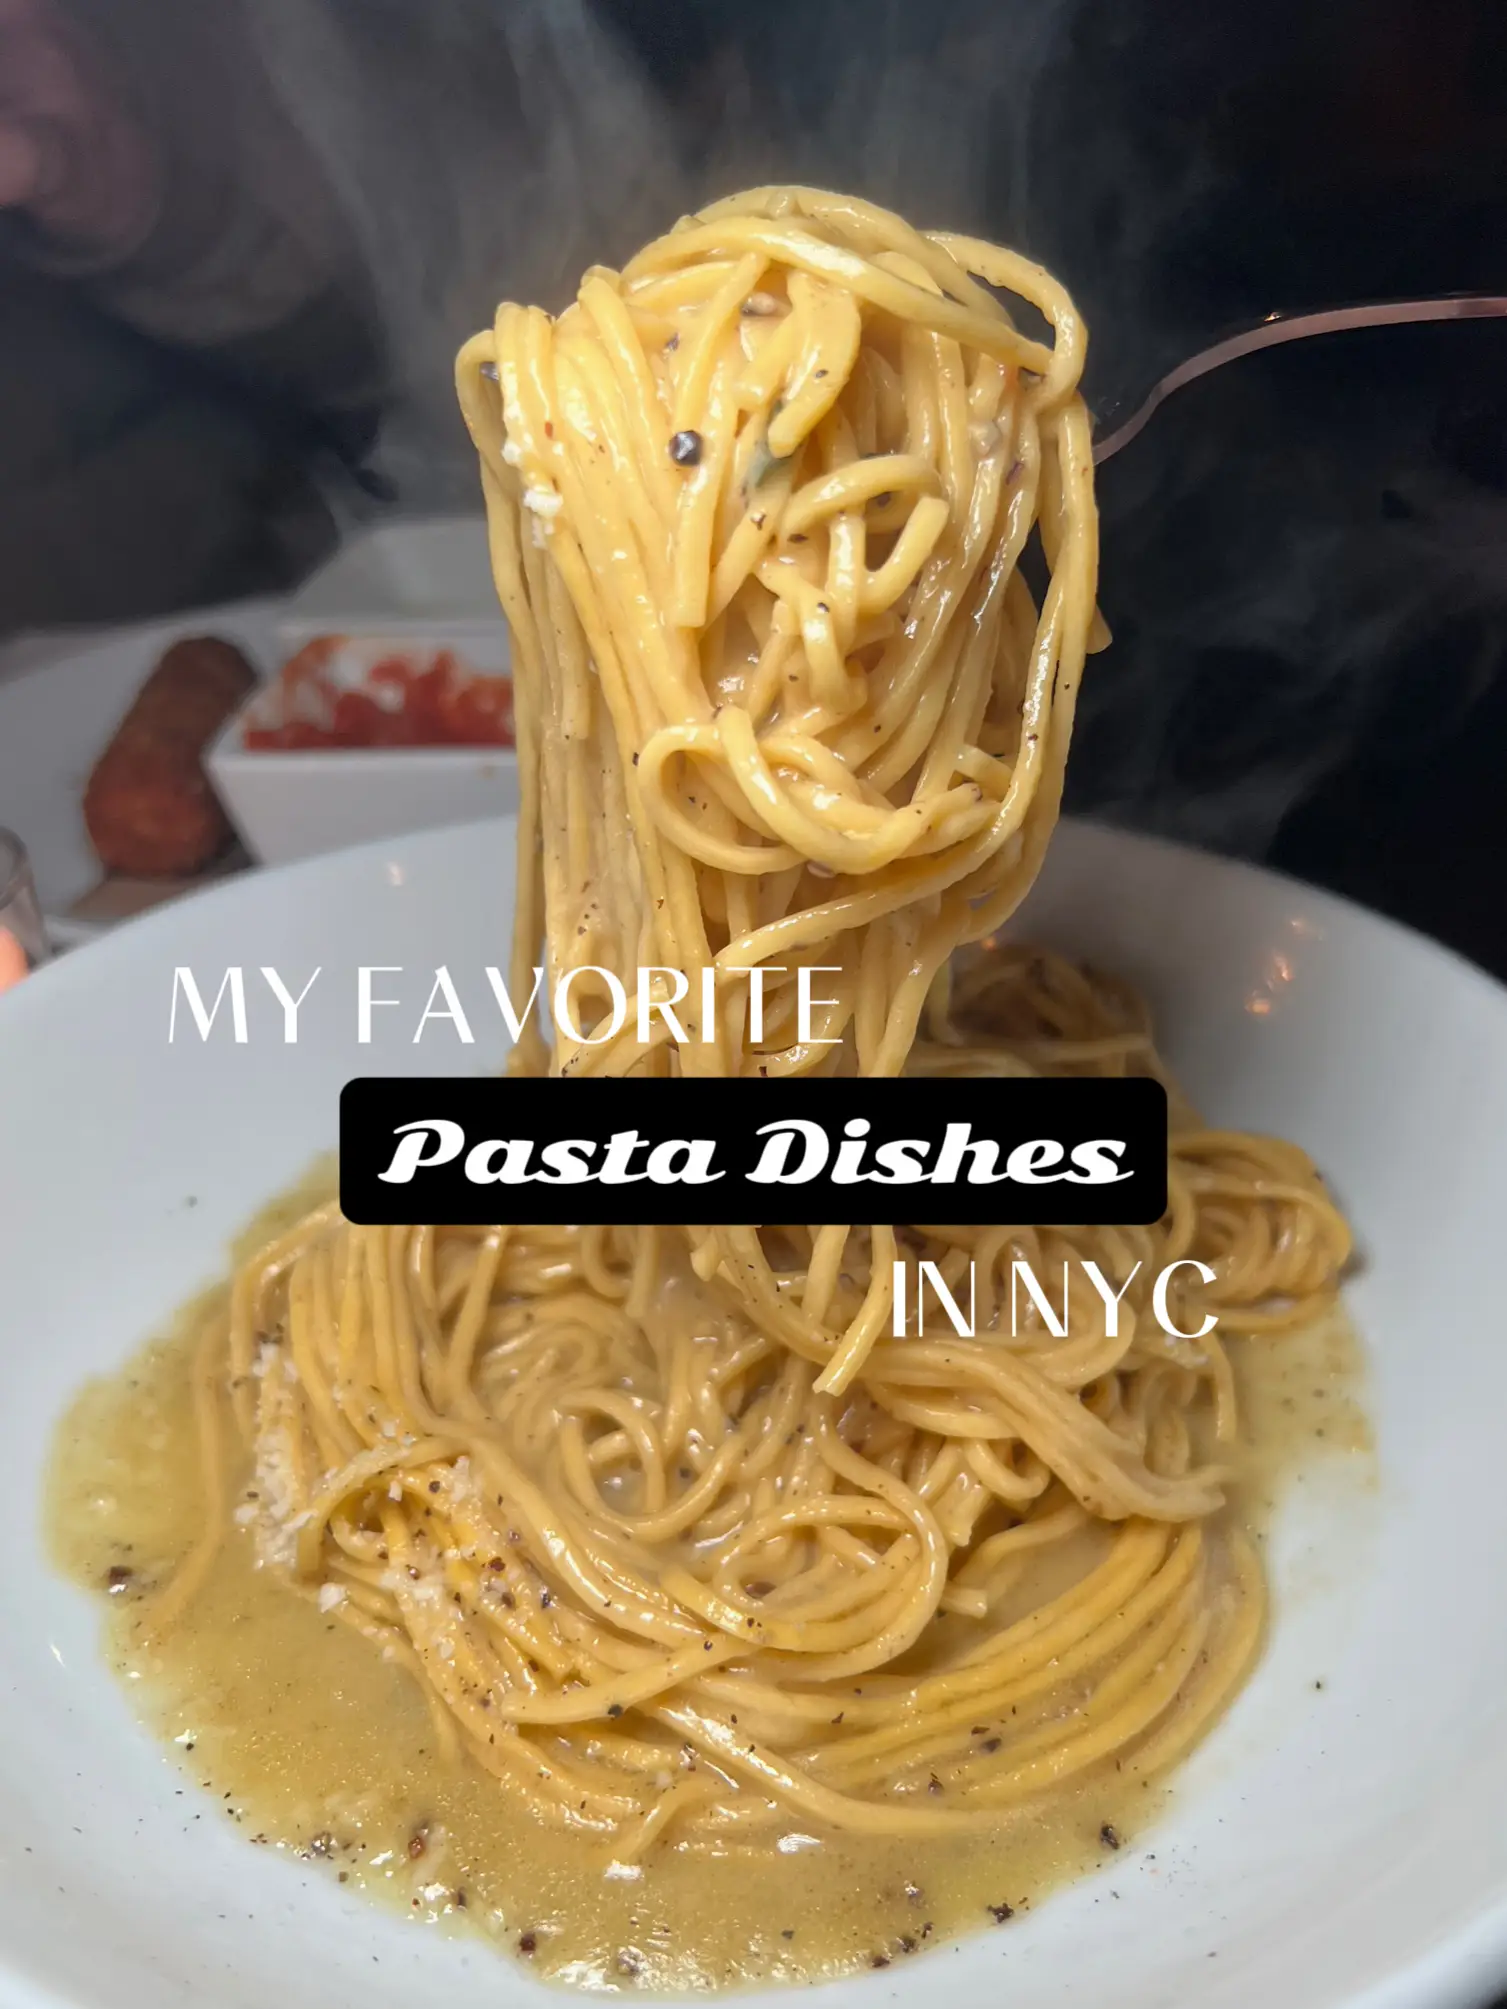 NYC PASTA YOU NEED🍝❤️❤️❤️'s images